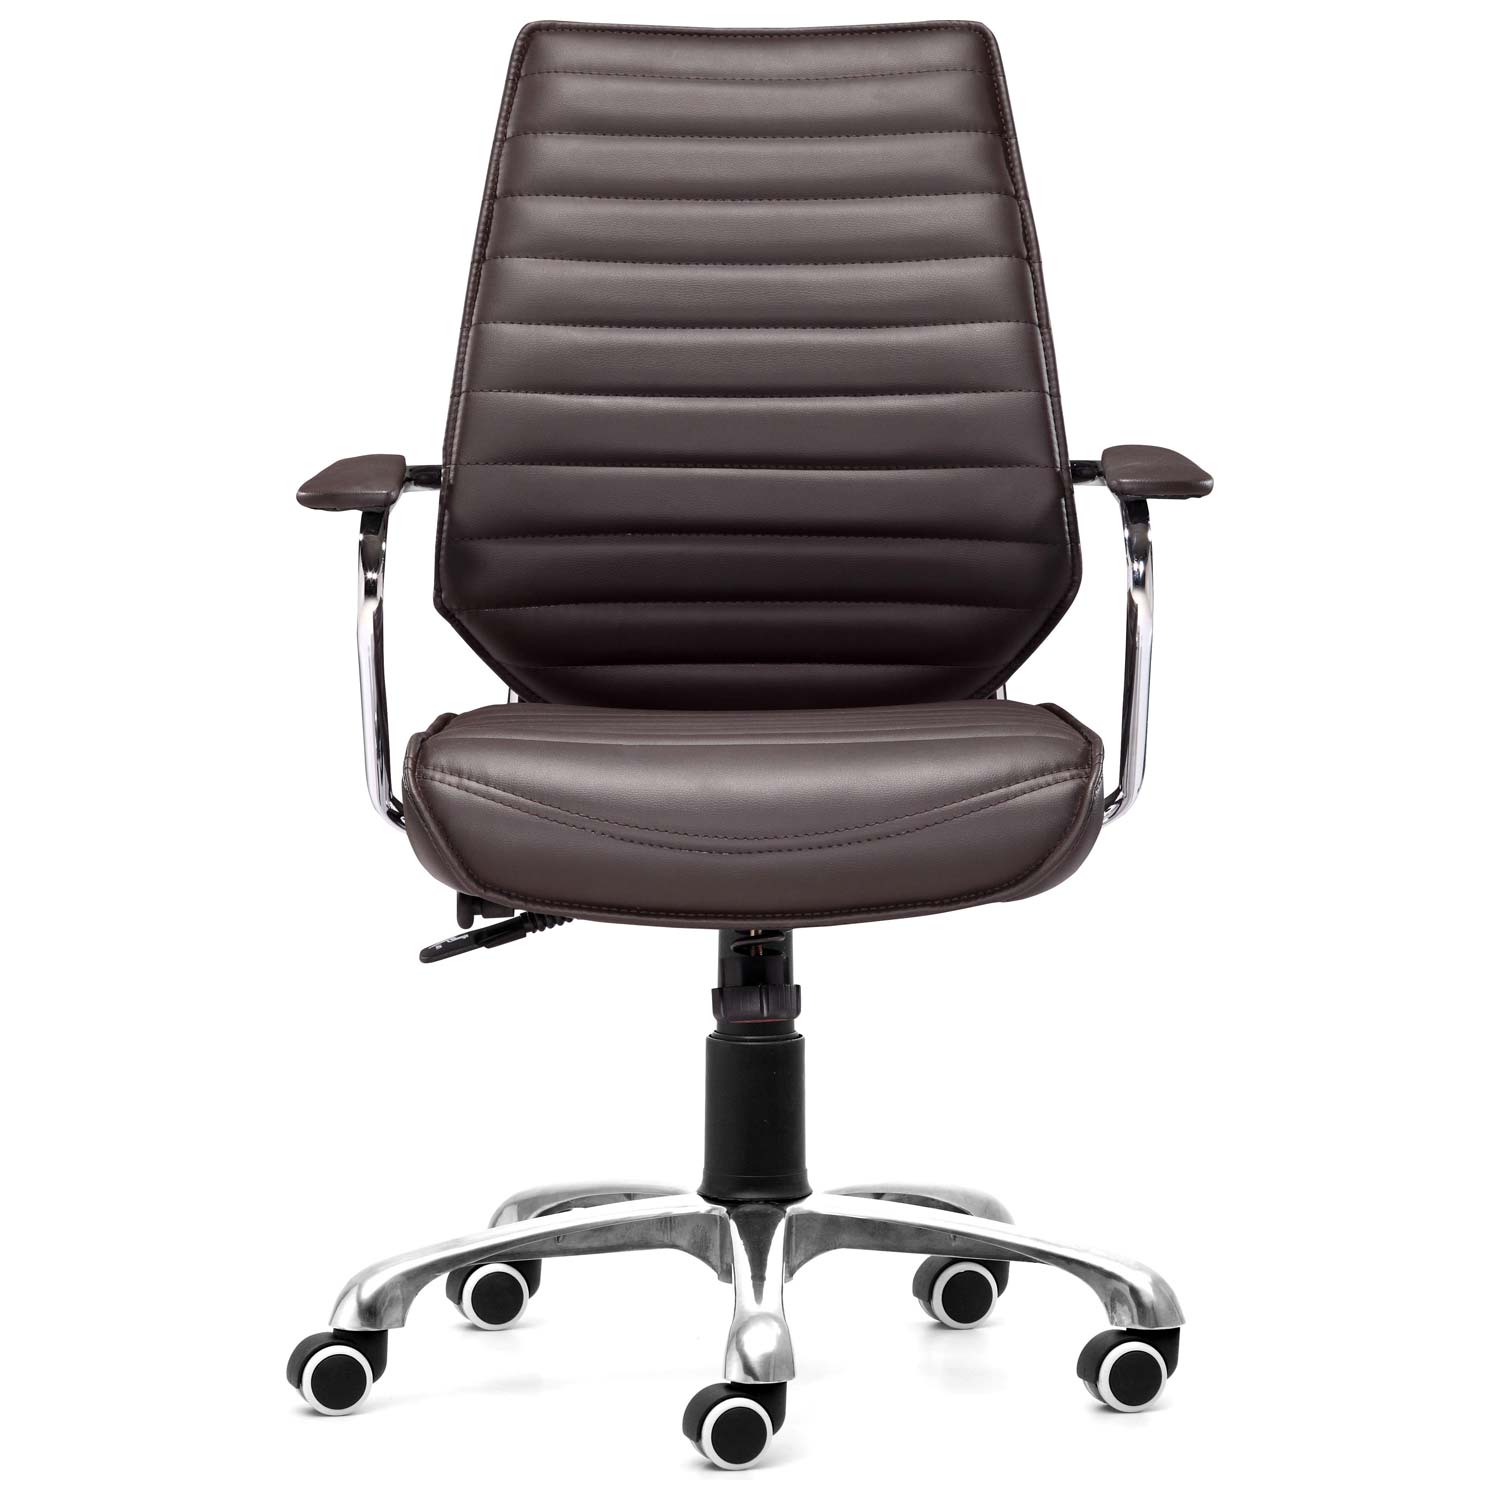 Enterprise Low Back Ribbed Office Chair - Chrome Steel, Espresso | DCG